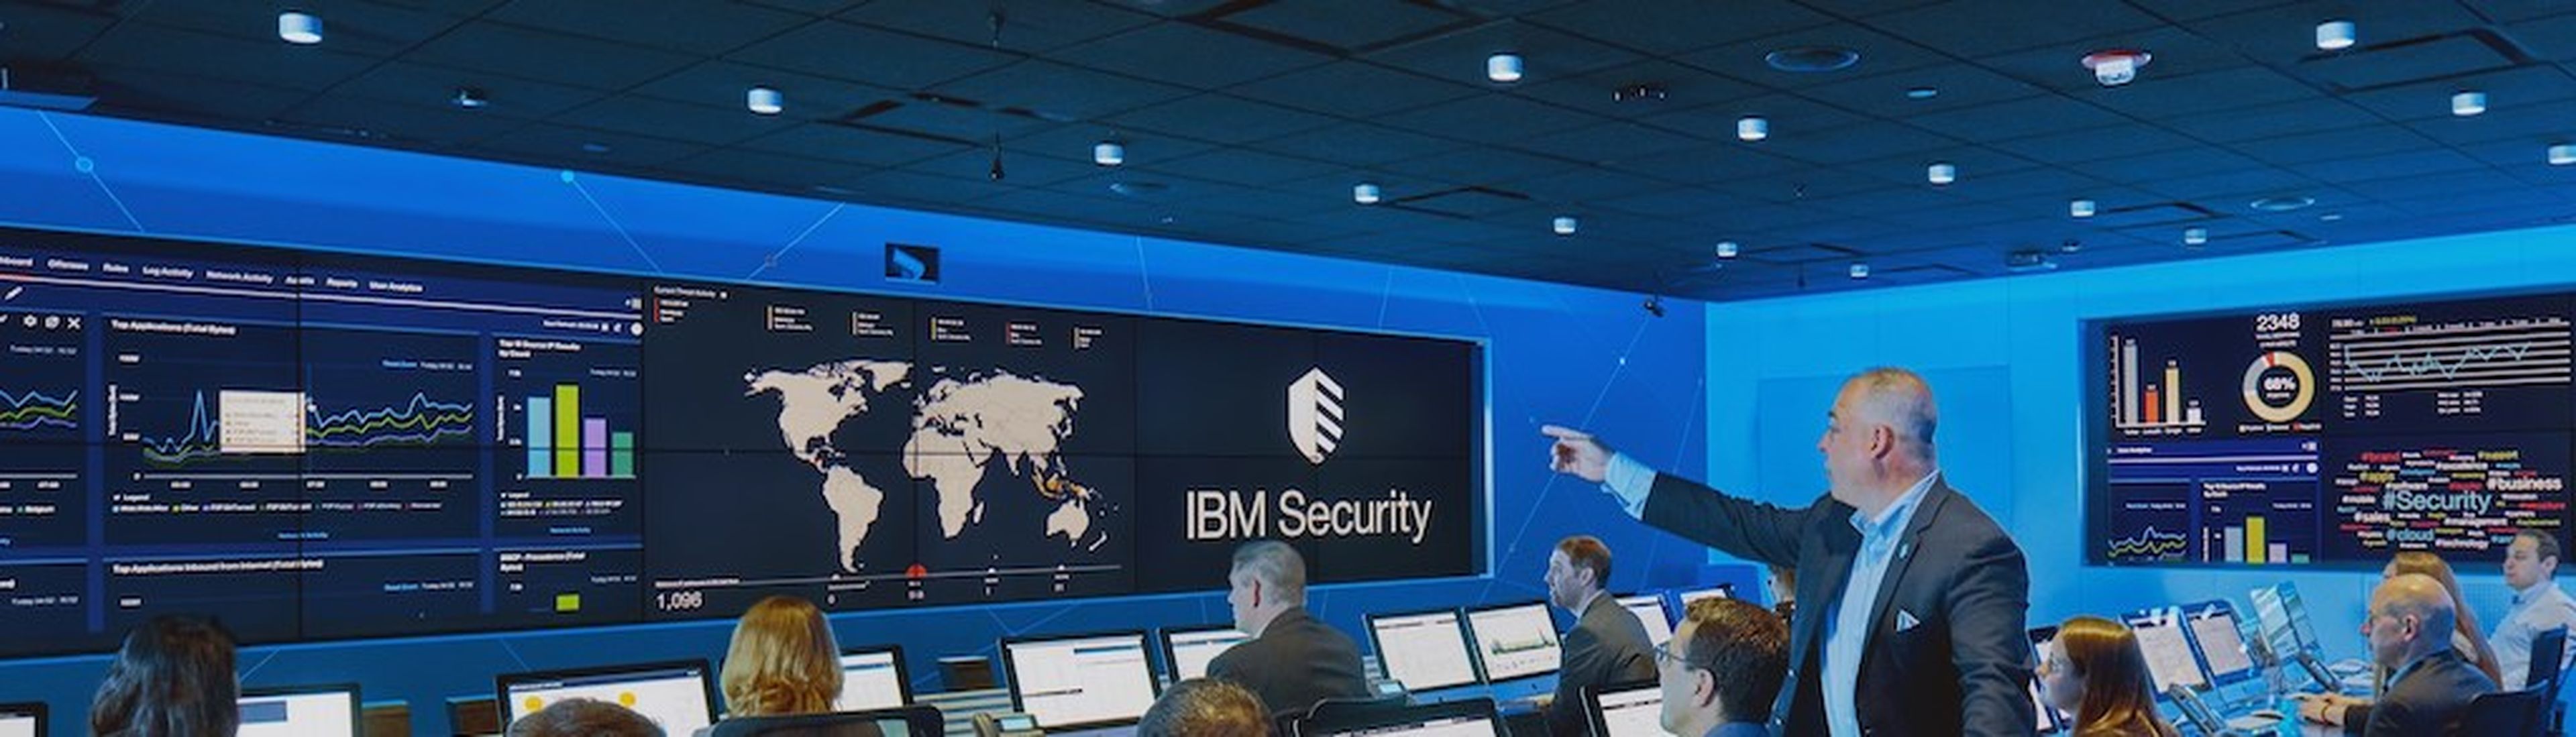 To help cities prepare for cyberattacks including growing ransomware threats, IBM is hosting complimentary training sessions for municipalities in the IBM X-Force Command Cyber Range (pictured) in Cambridge, Massachusetts, where they can simulate attacks and practice their response. The company also is providing new tools and technologies to help c...